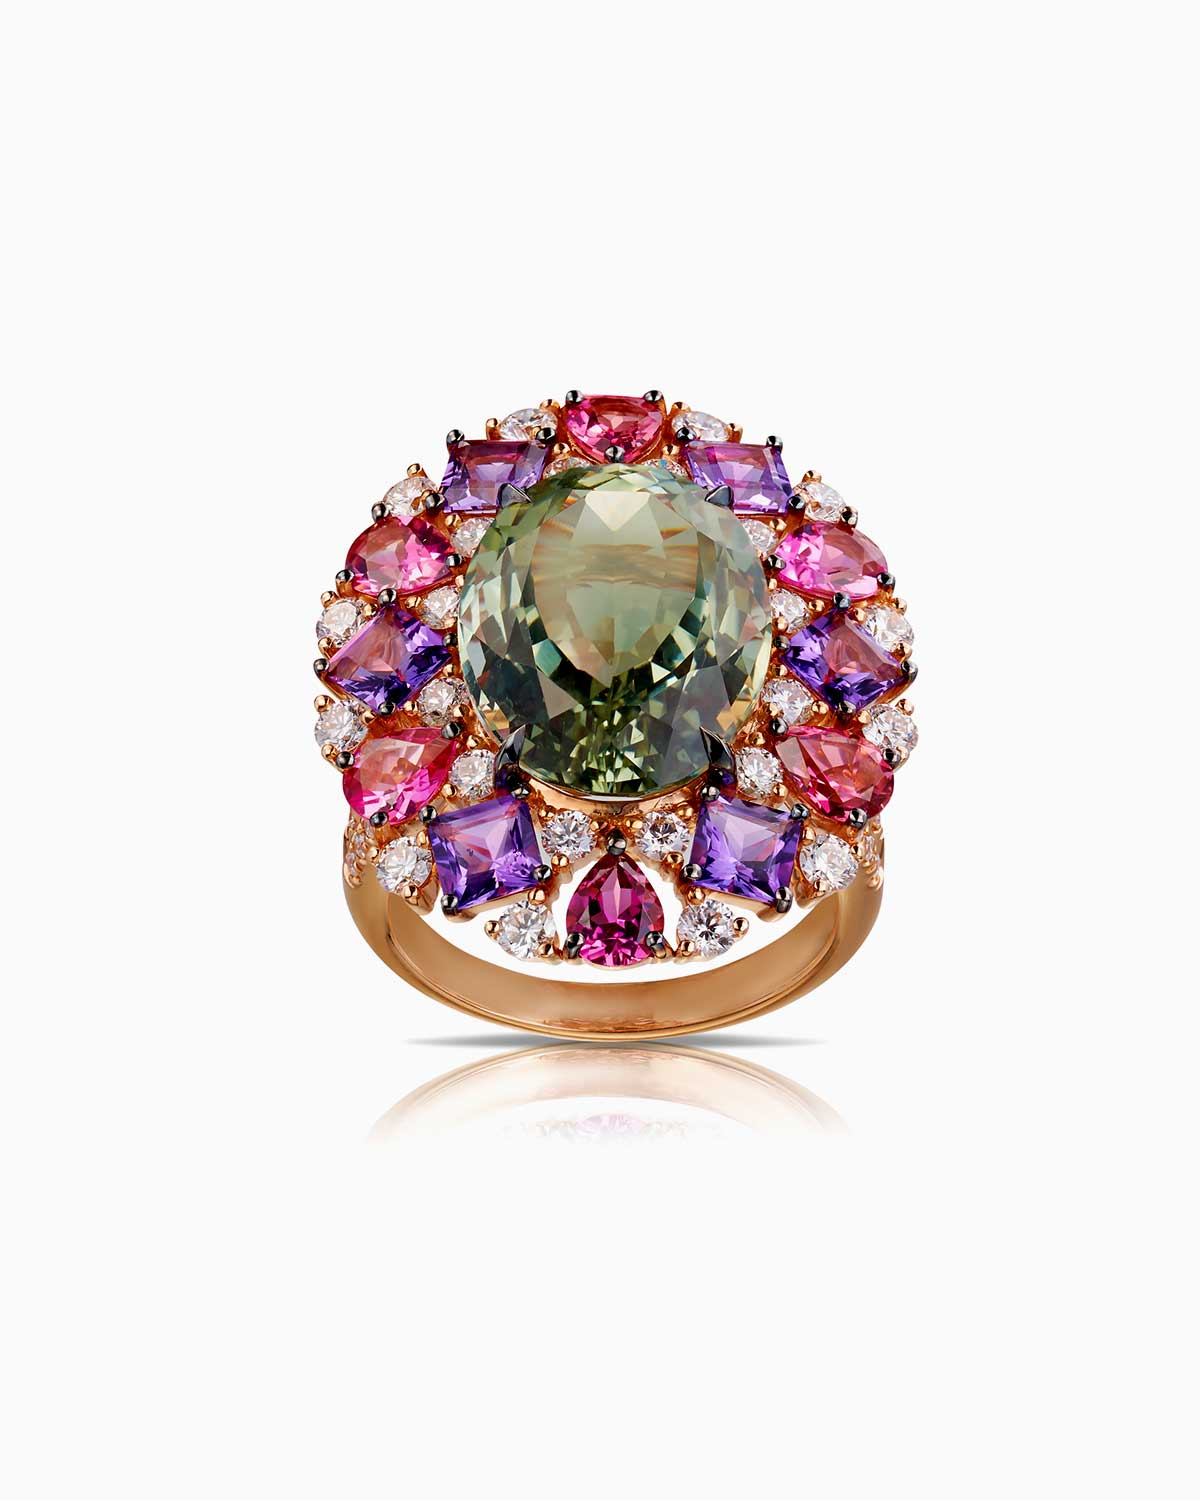 8.95ct green quartz ‘madame de pompadour’ ring, featuring amethyst, pink tourmaline, white diamonds and 18 karat rose gold by claude and me jewellery.